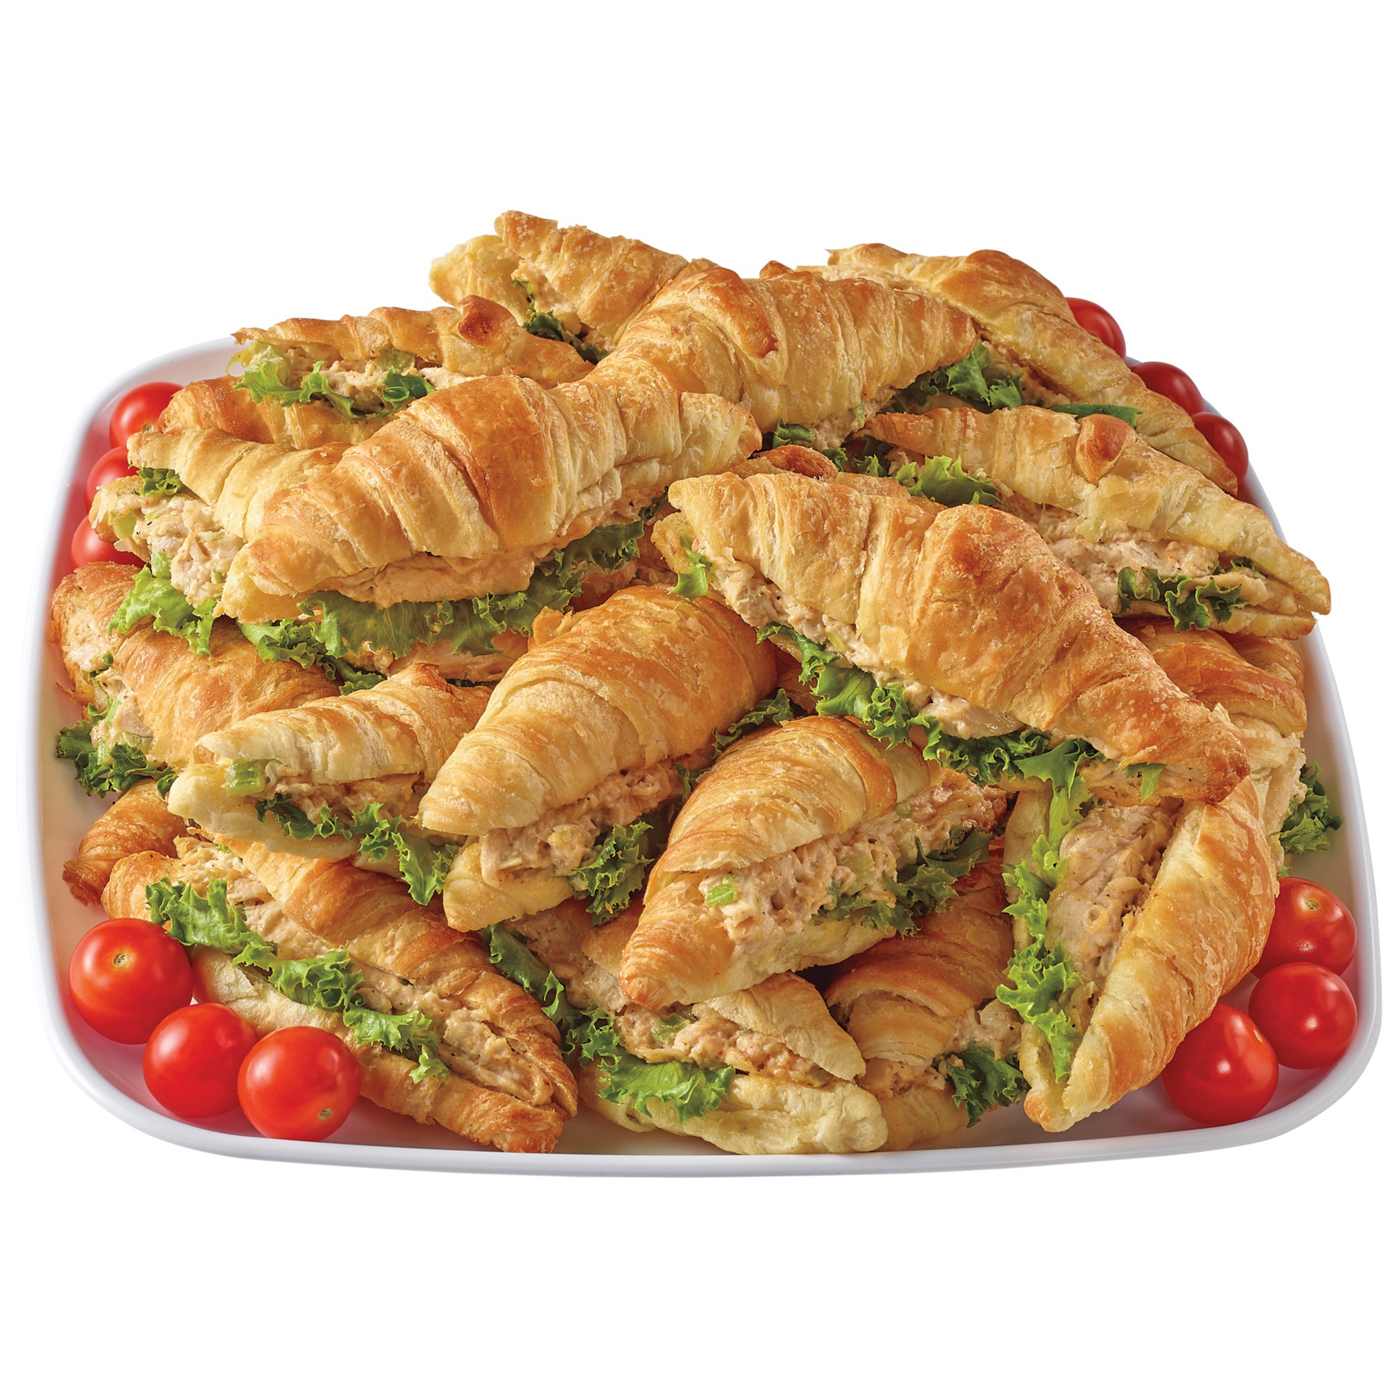 H-E-B Deli Large Party Tray - Rotisserie Chicken Salad Croissant Sandwiches; image 1 of 2